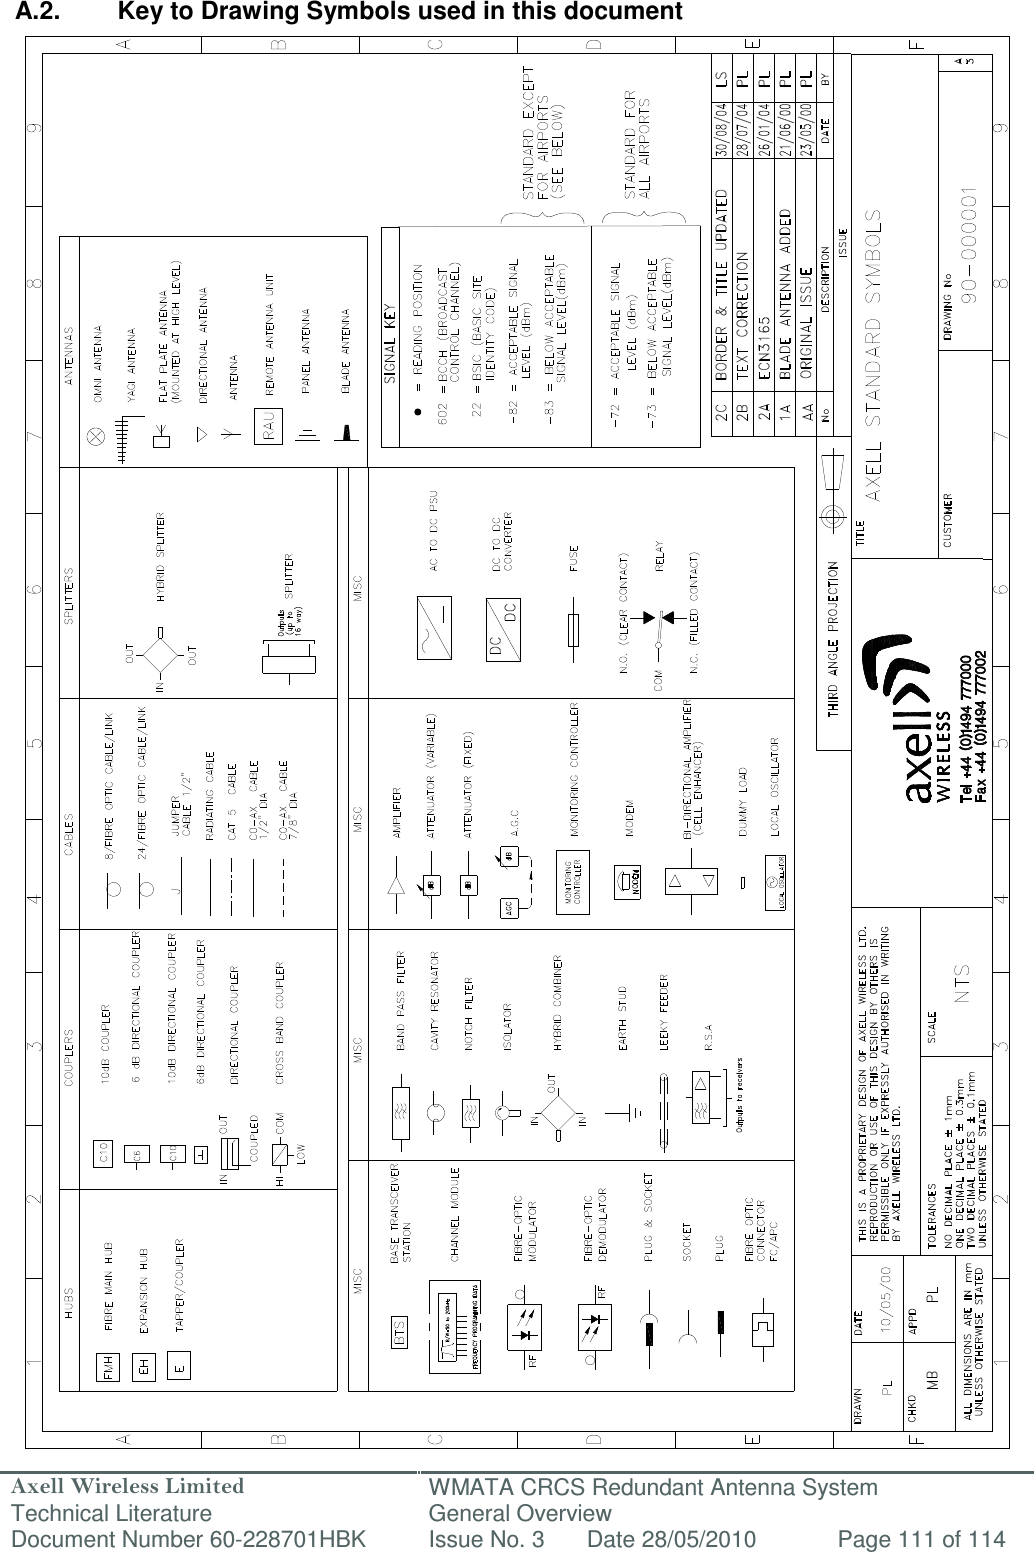 Axell Wireless Limited Technical Literature WMATA CRCS Redundant Antenna System General Overview Document Number 60-228701HBK  Issue No. 3  Date 28/05/2010  Page 111 of 114   A.2.  Key to Drawing Symbols used in this document                                                       